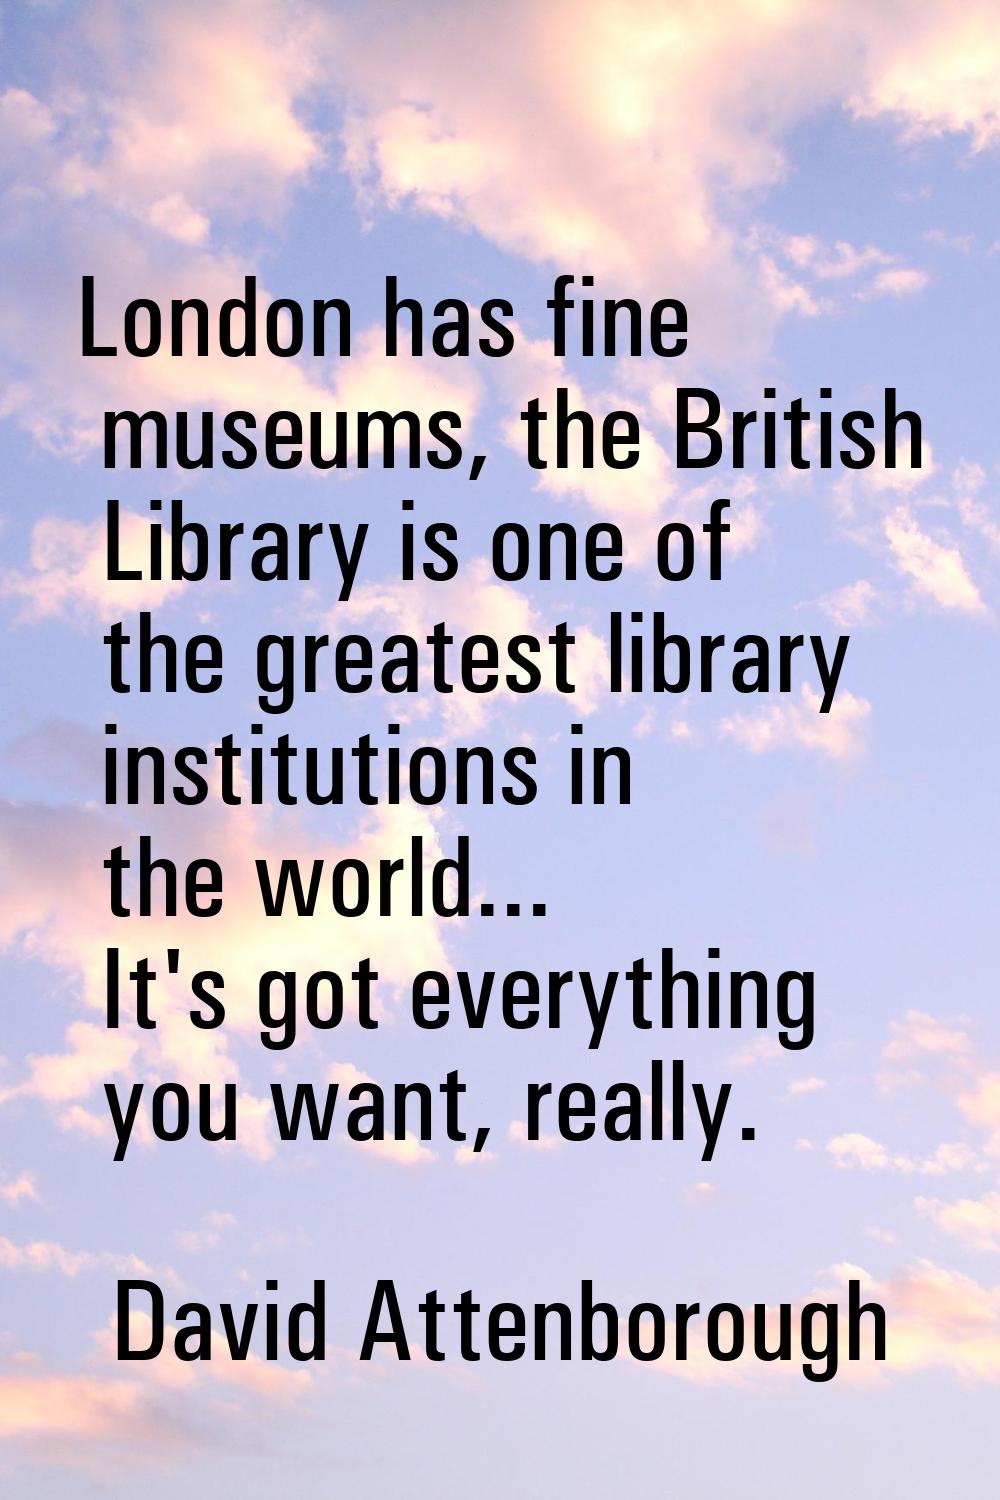 London has fine museums, the British Library is one of the greatest library institutions in the wor